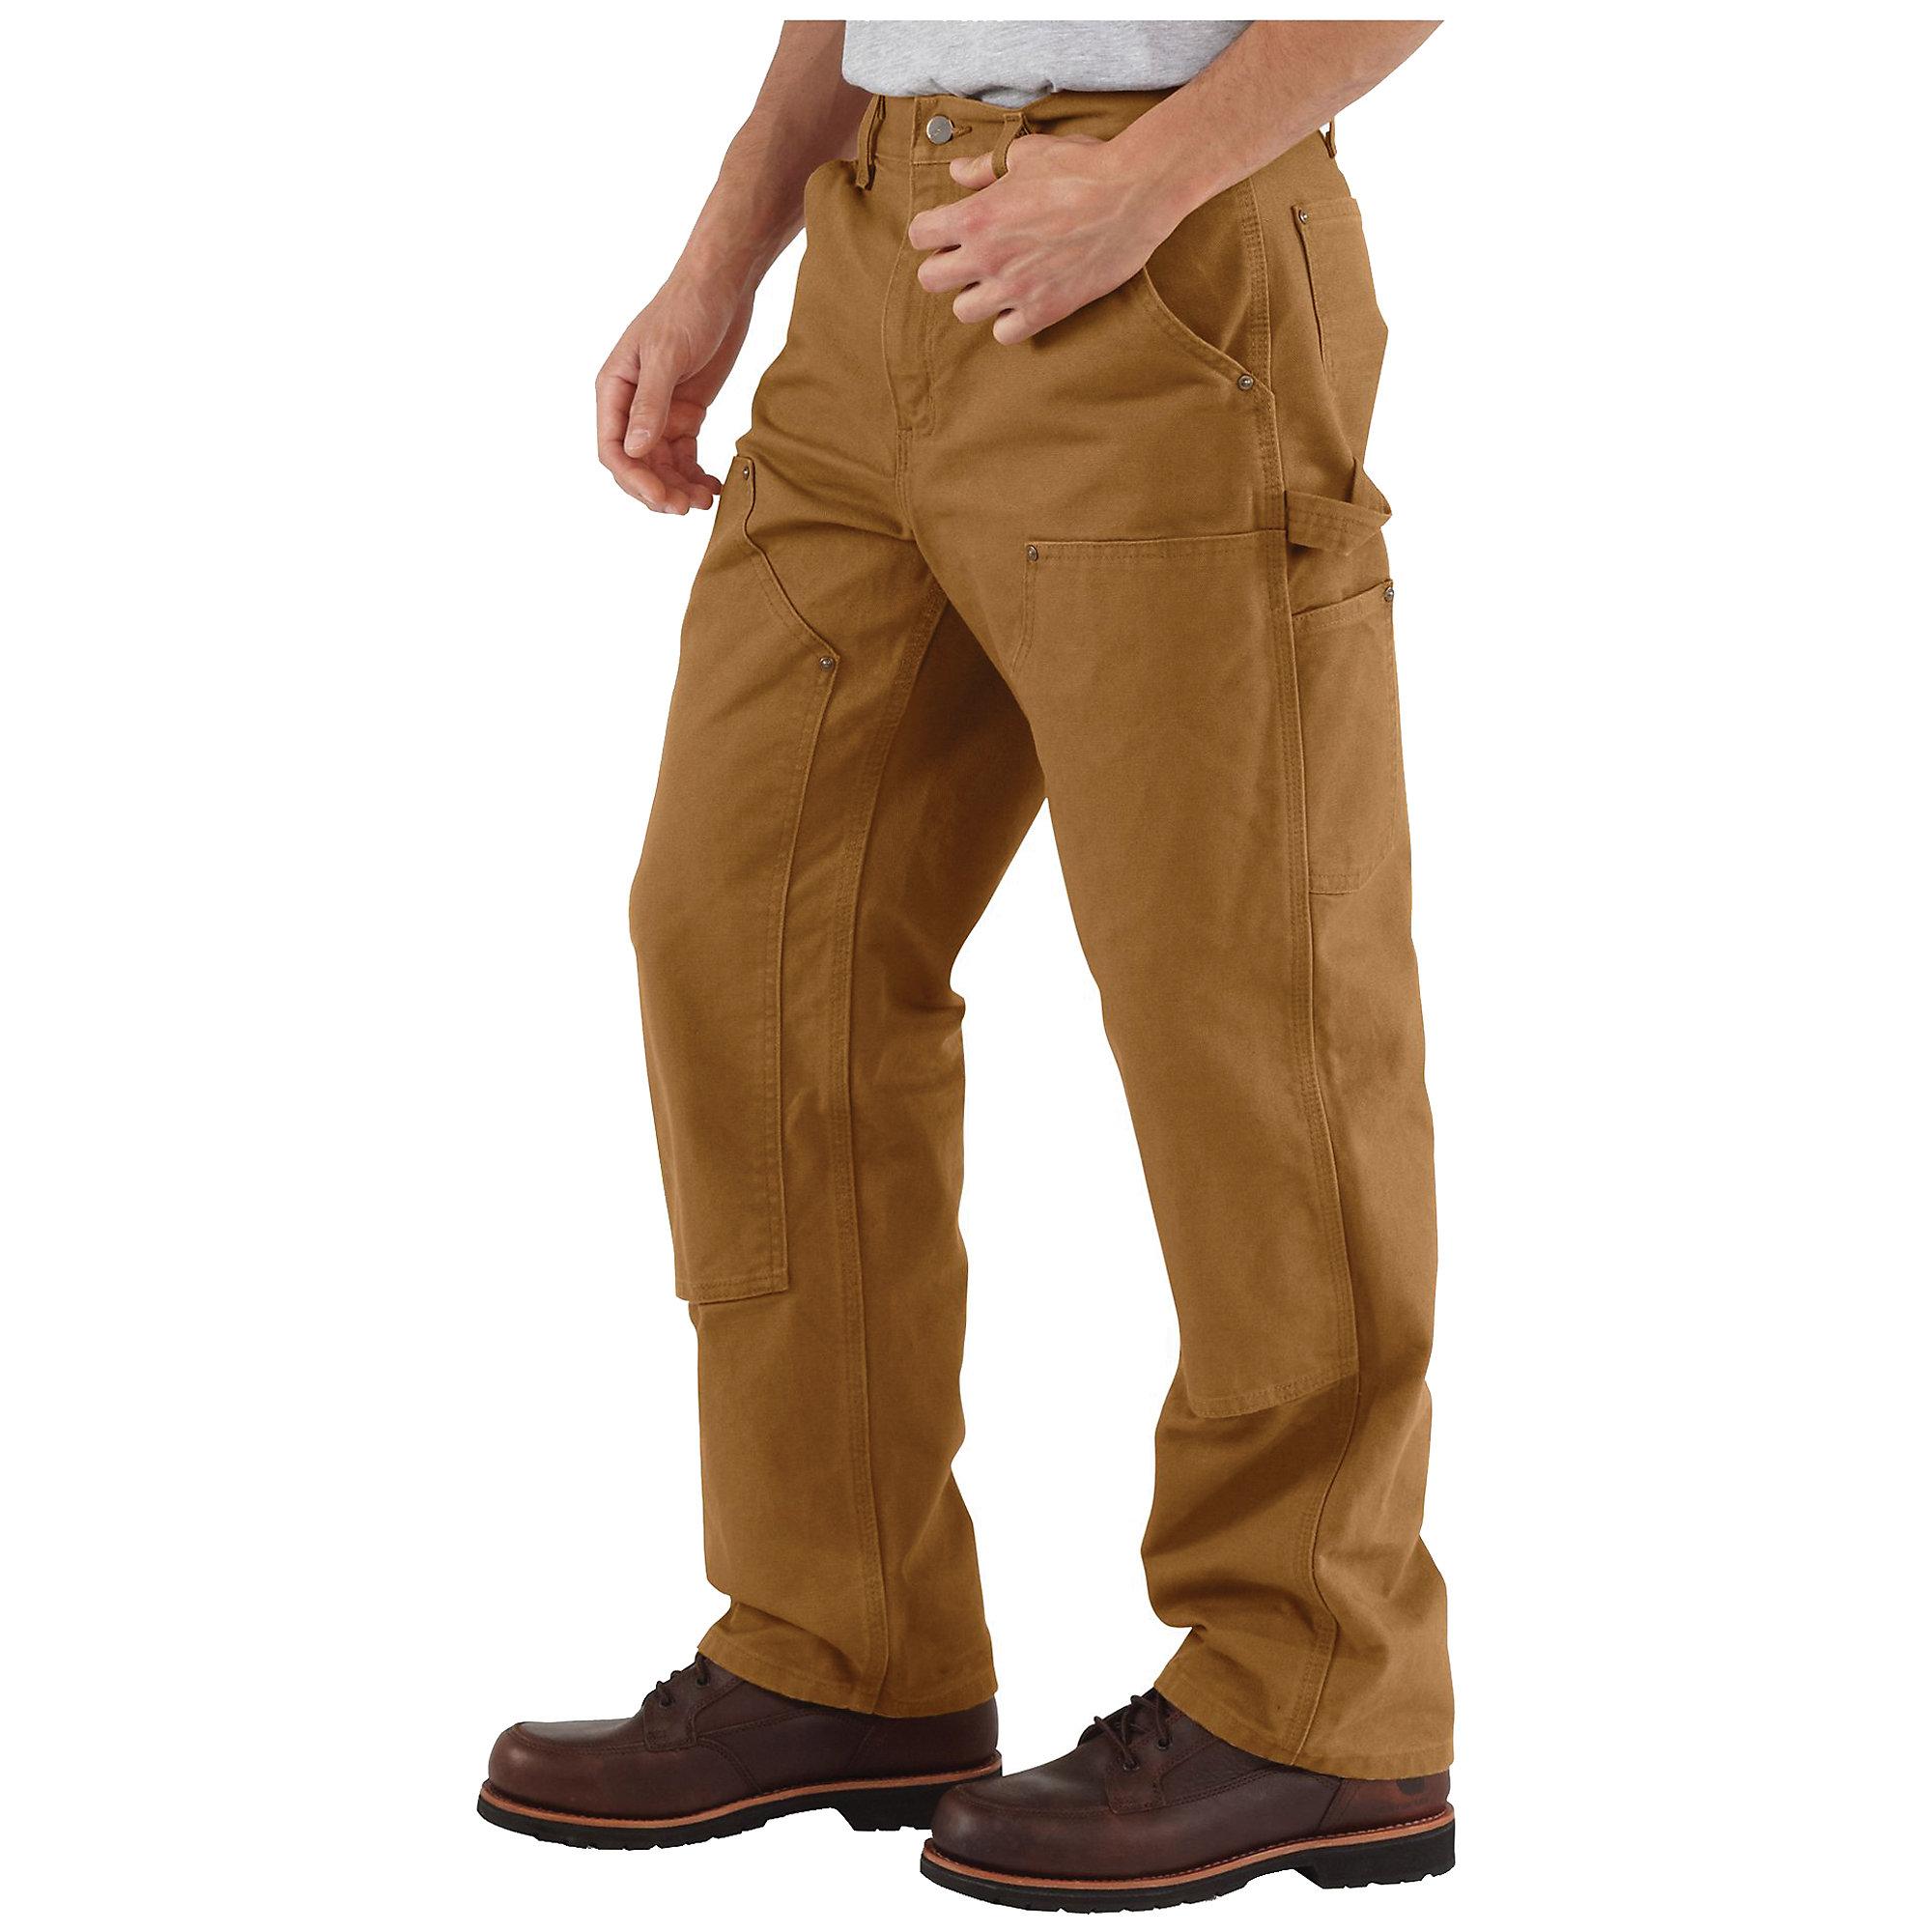 Carhartt Cotton Washed Duck Double Front Work Dungaree Pant in Brown ...